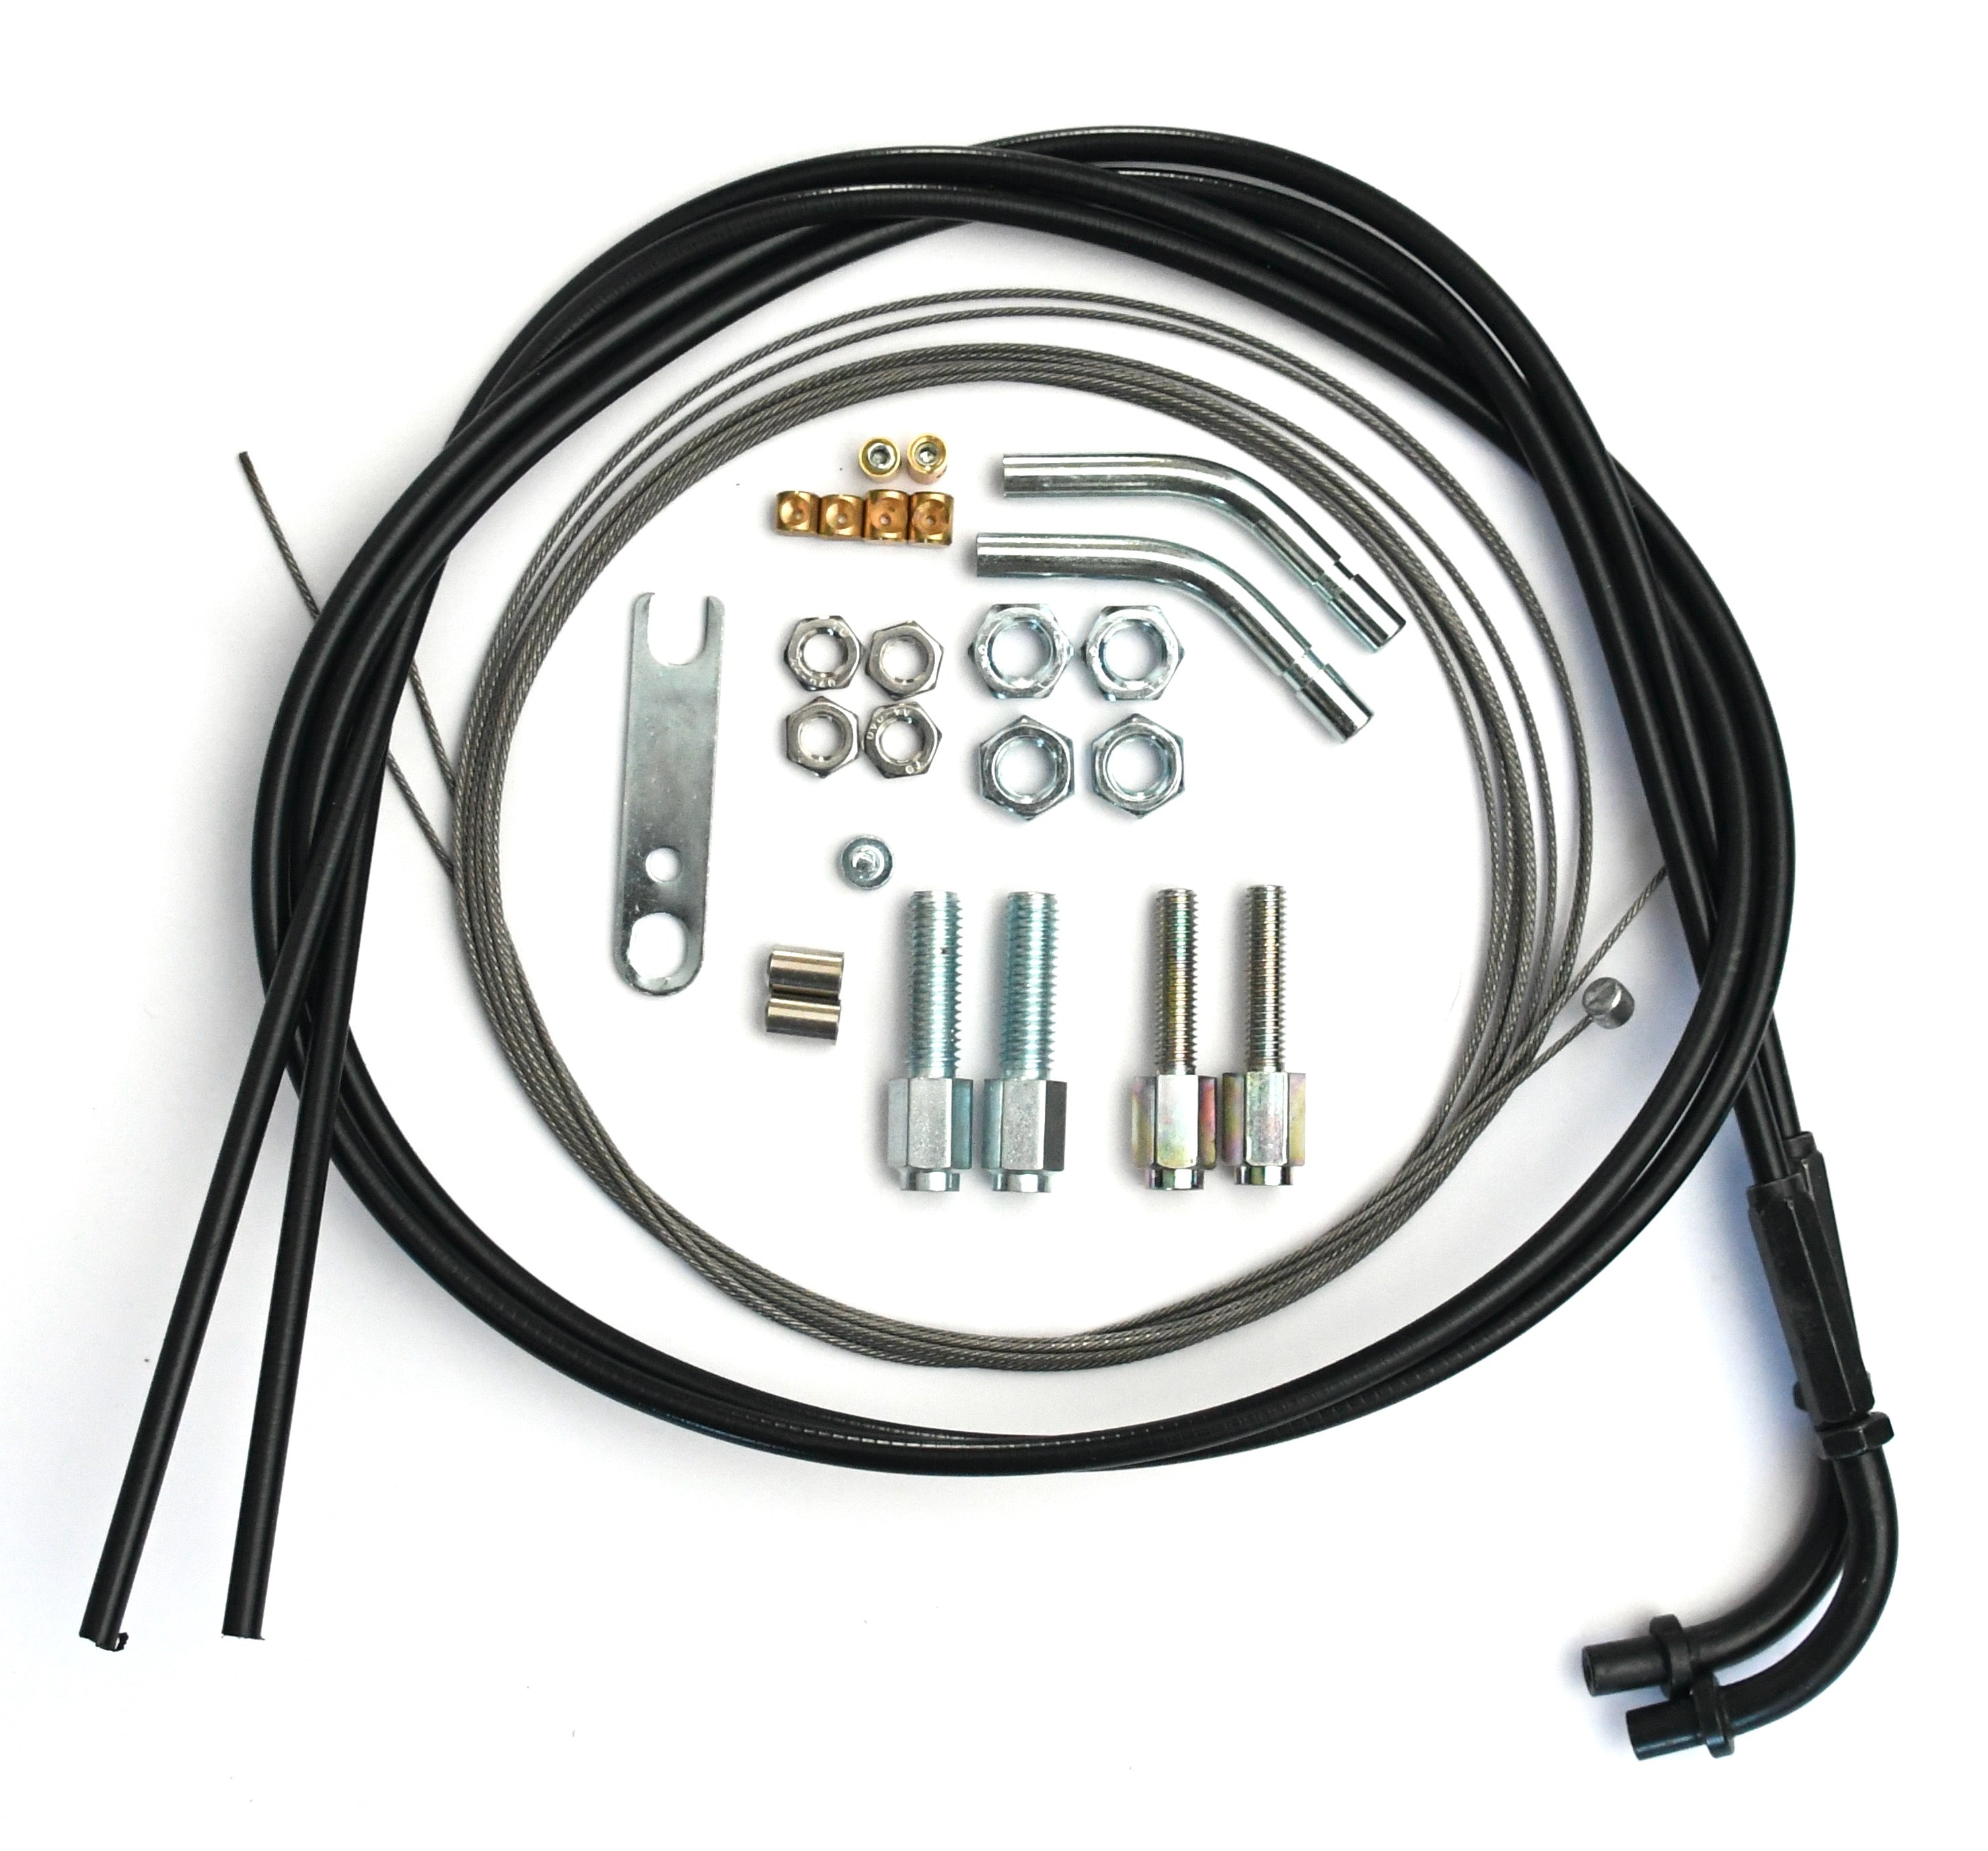 Venhill Universal Throttle Cable Kit for Domino XM2 Throttle - 0